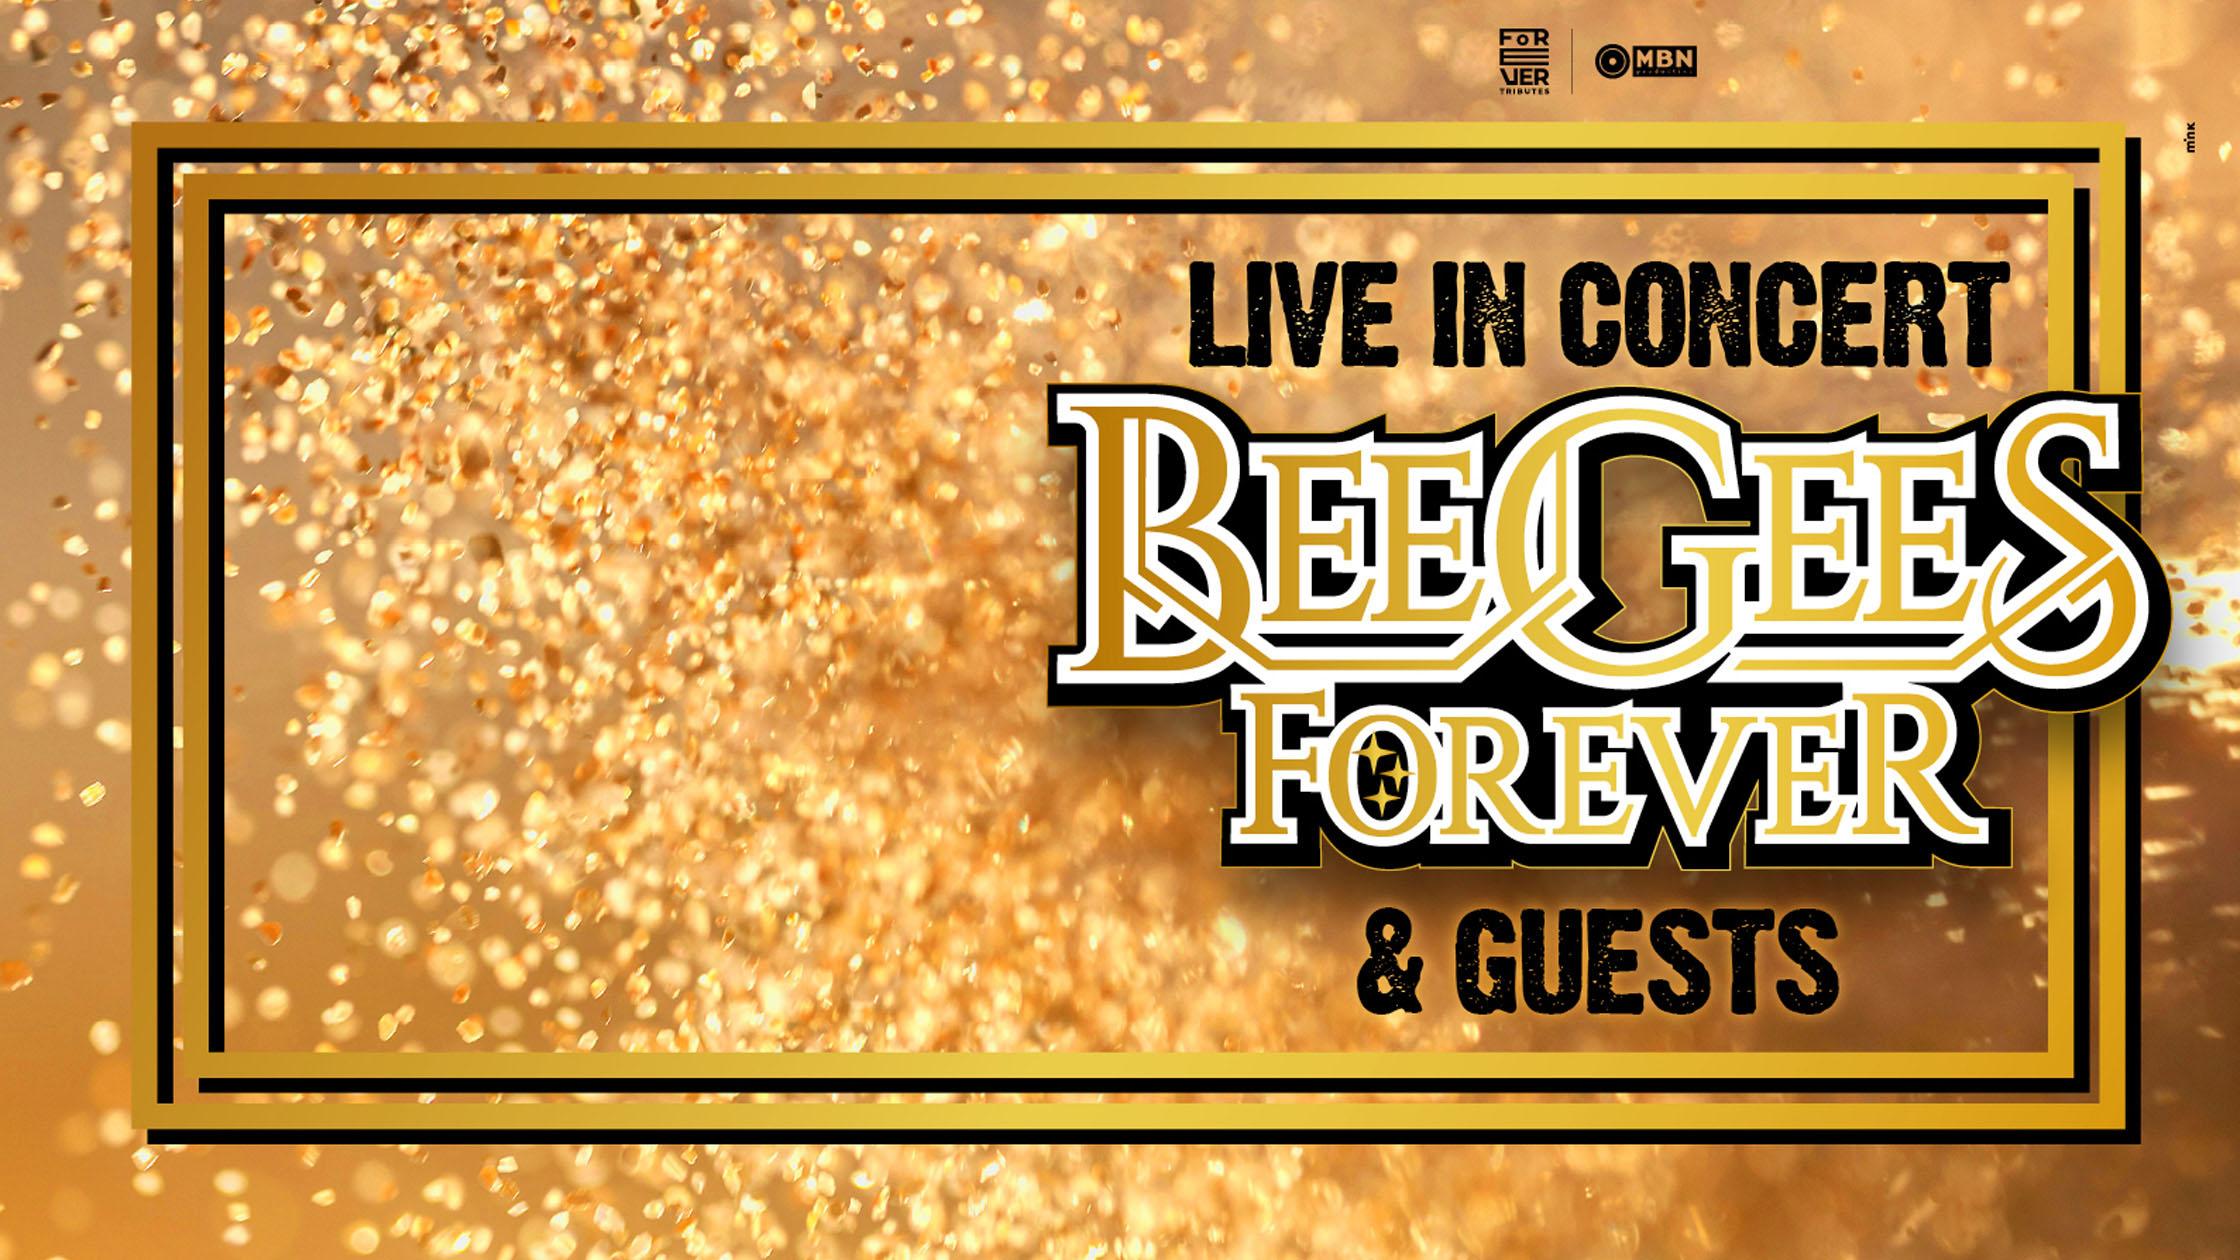 Bee Gees Forever Live in concert!